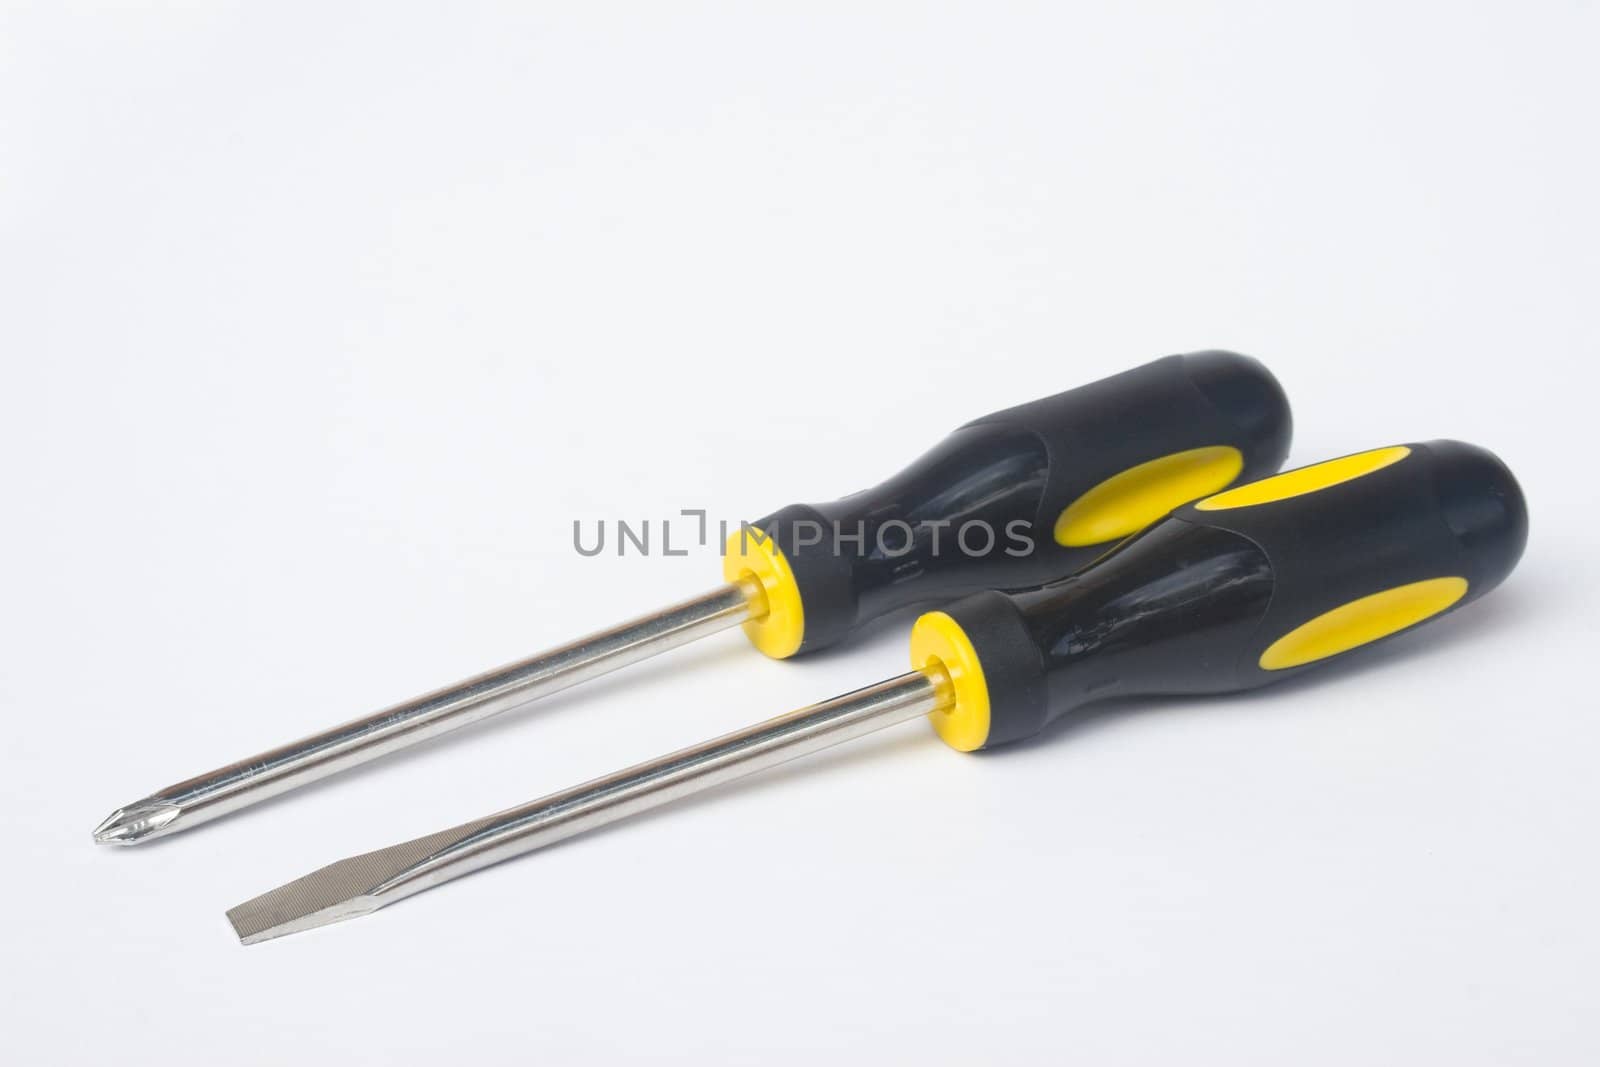 Screwdrivers by timscottrom